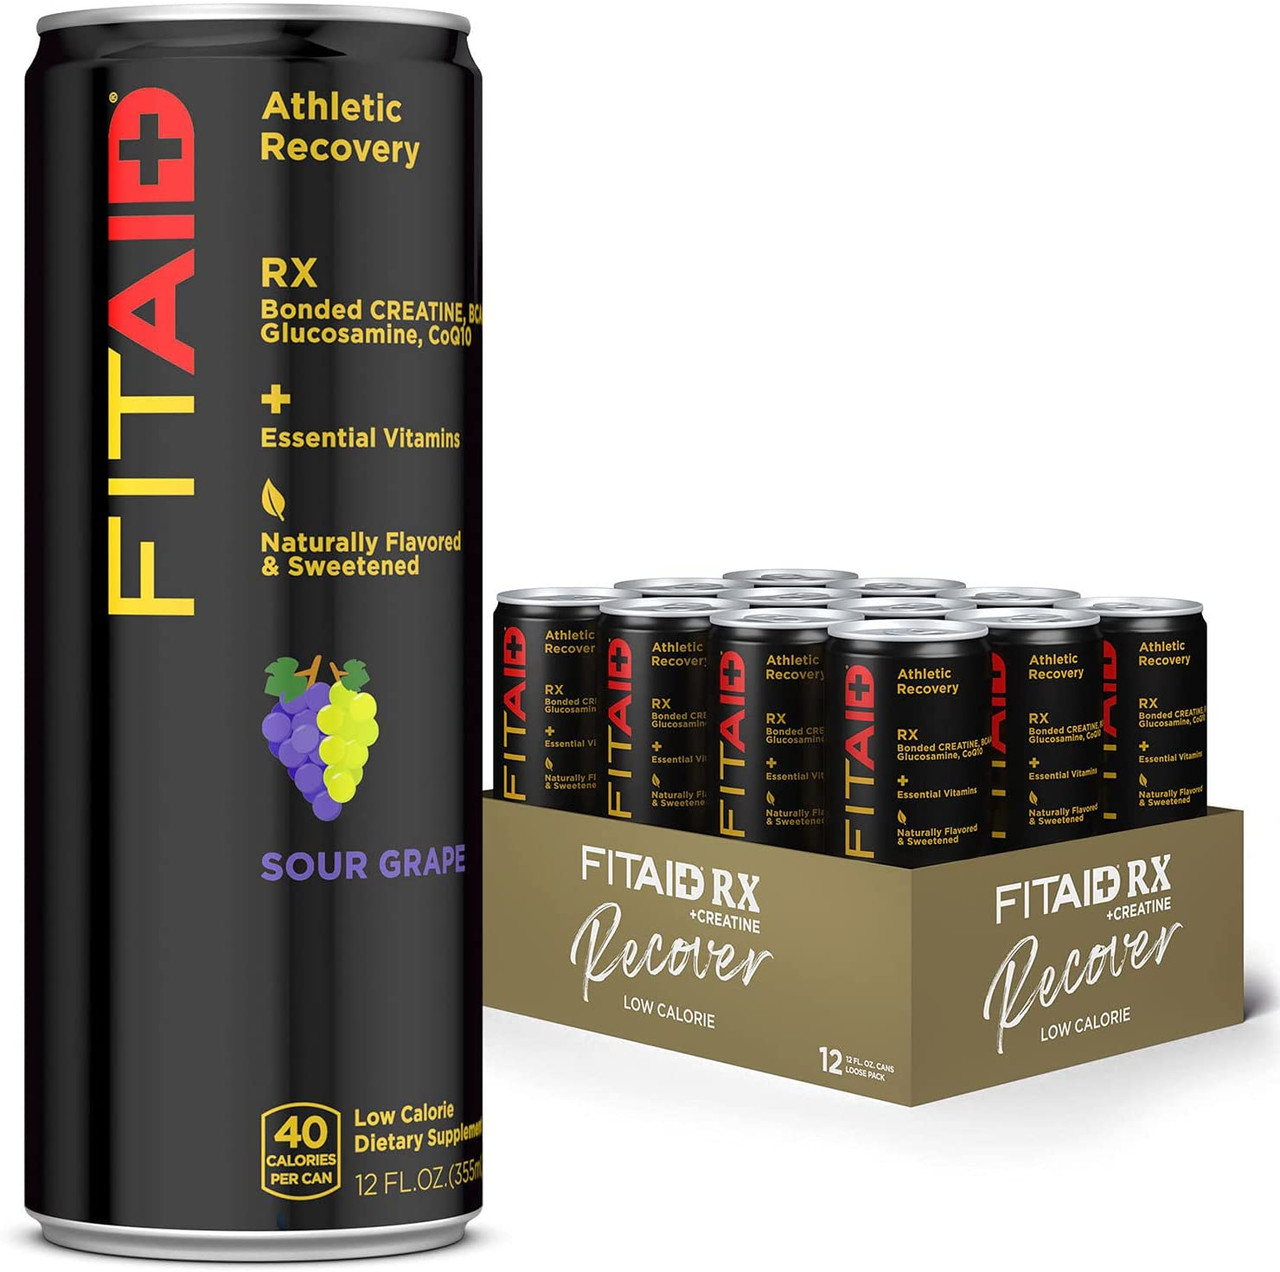 FITAID ® RX Athletic Recovery SOUR GRAPE - BONDED CREATINE + BCAAS